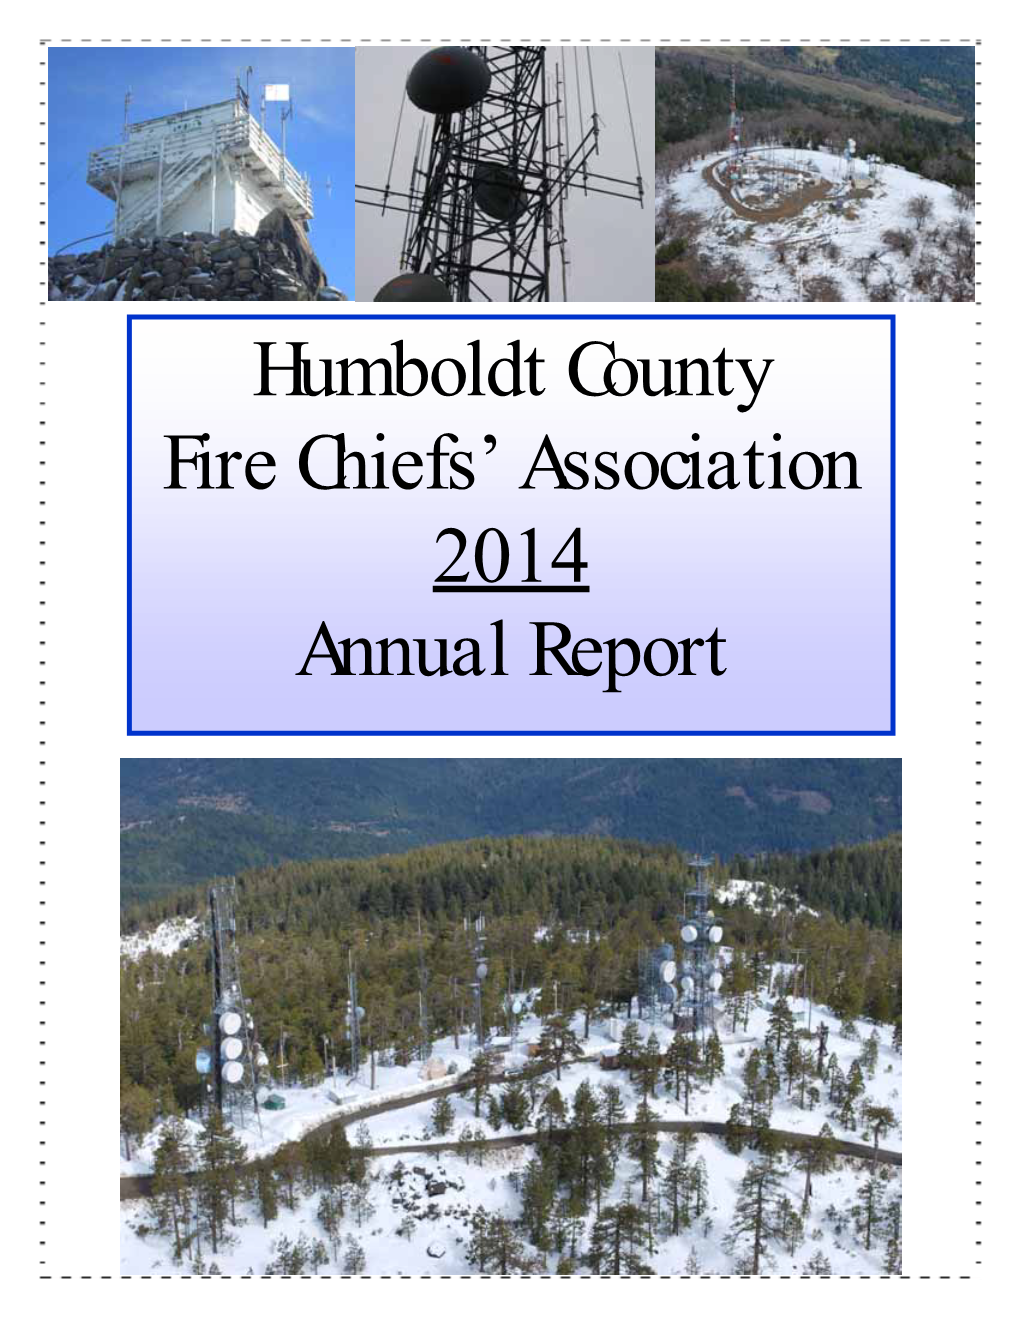 Humboldt County Fire Chiefs' Association 2014 Annual Report